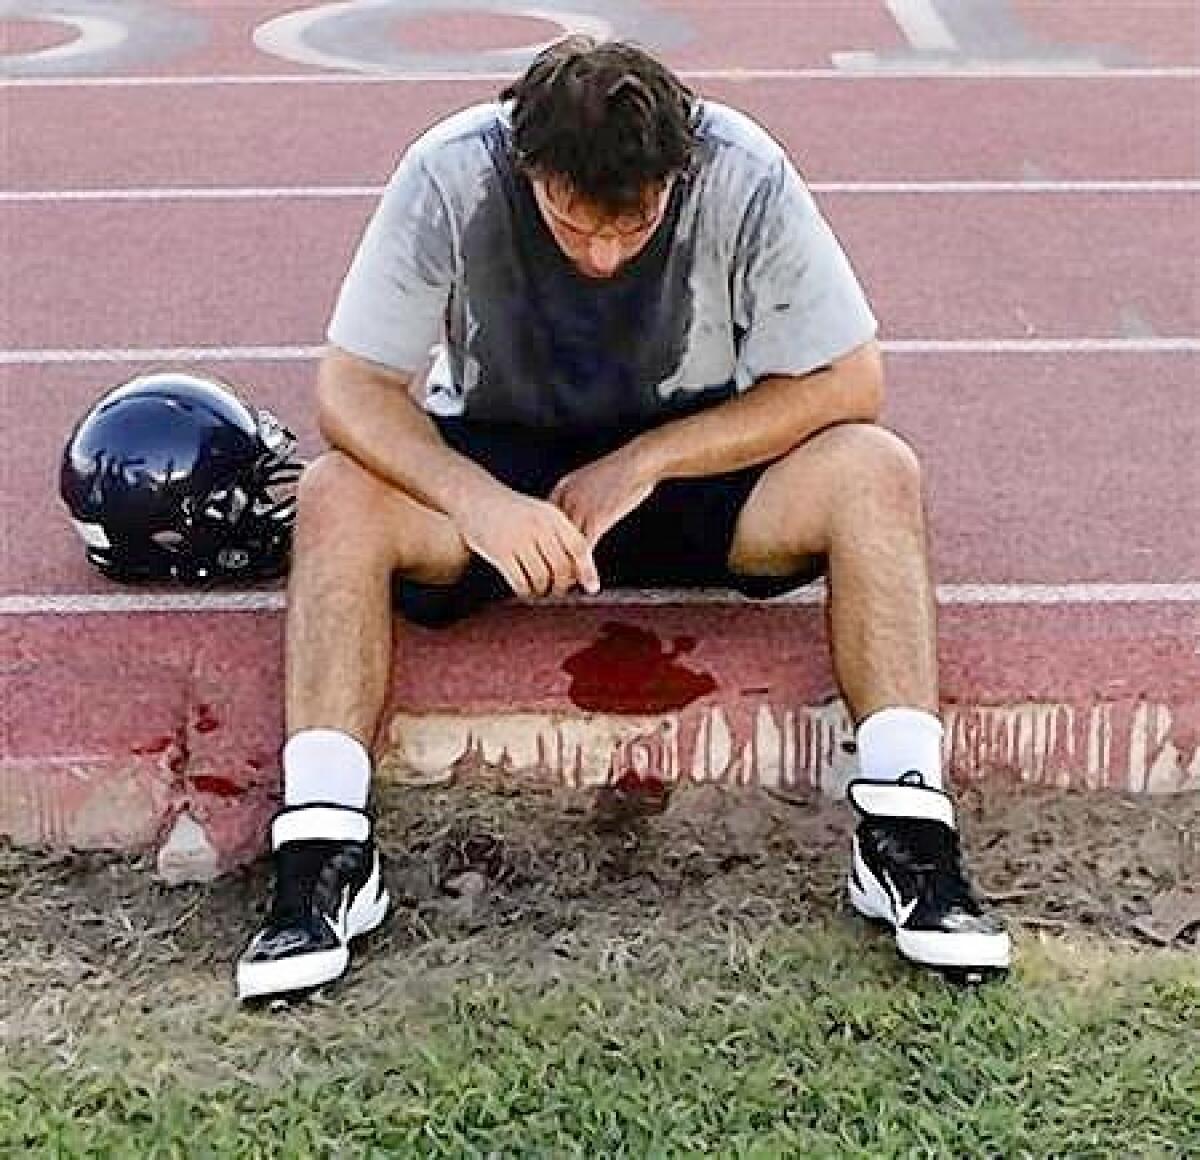 McClintock High School Chargers football player Joe Sanford takes a break from practice after feeling light-headed in Tempe, Arizona